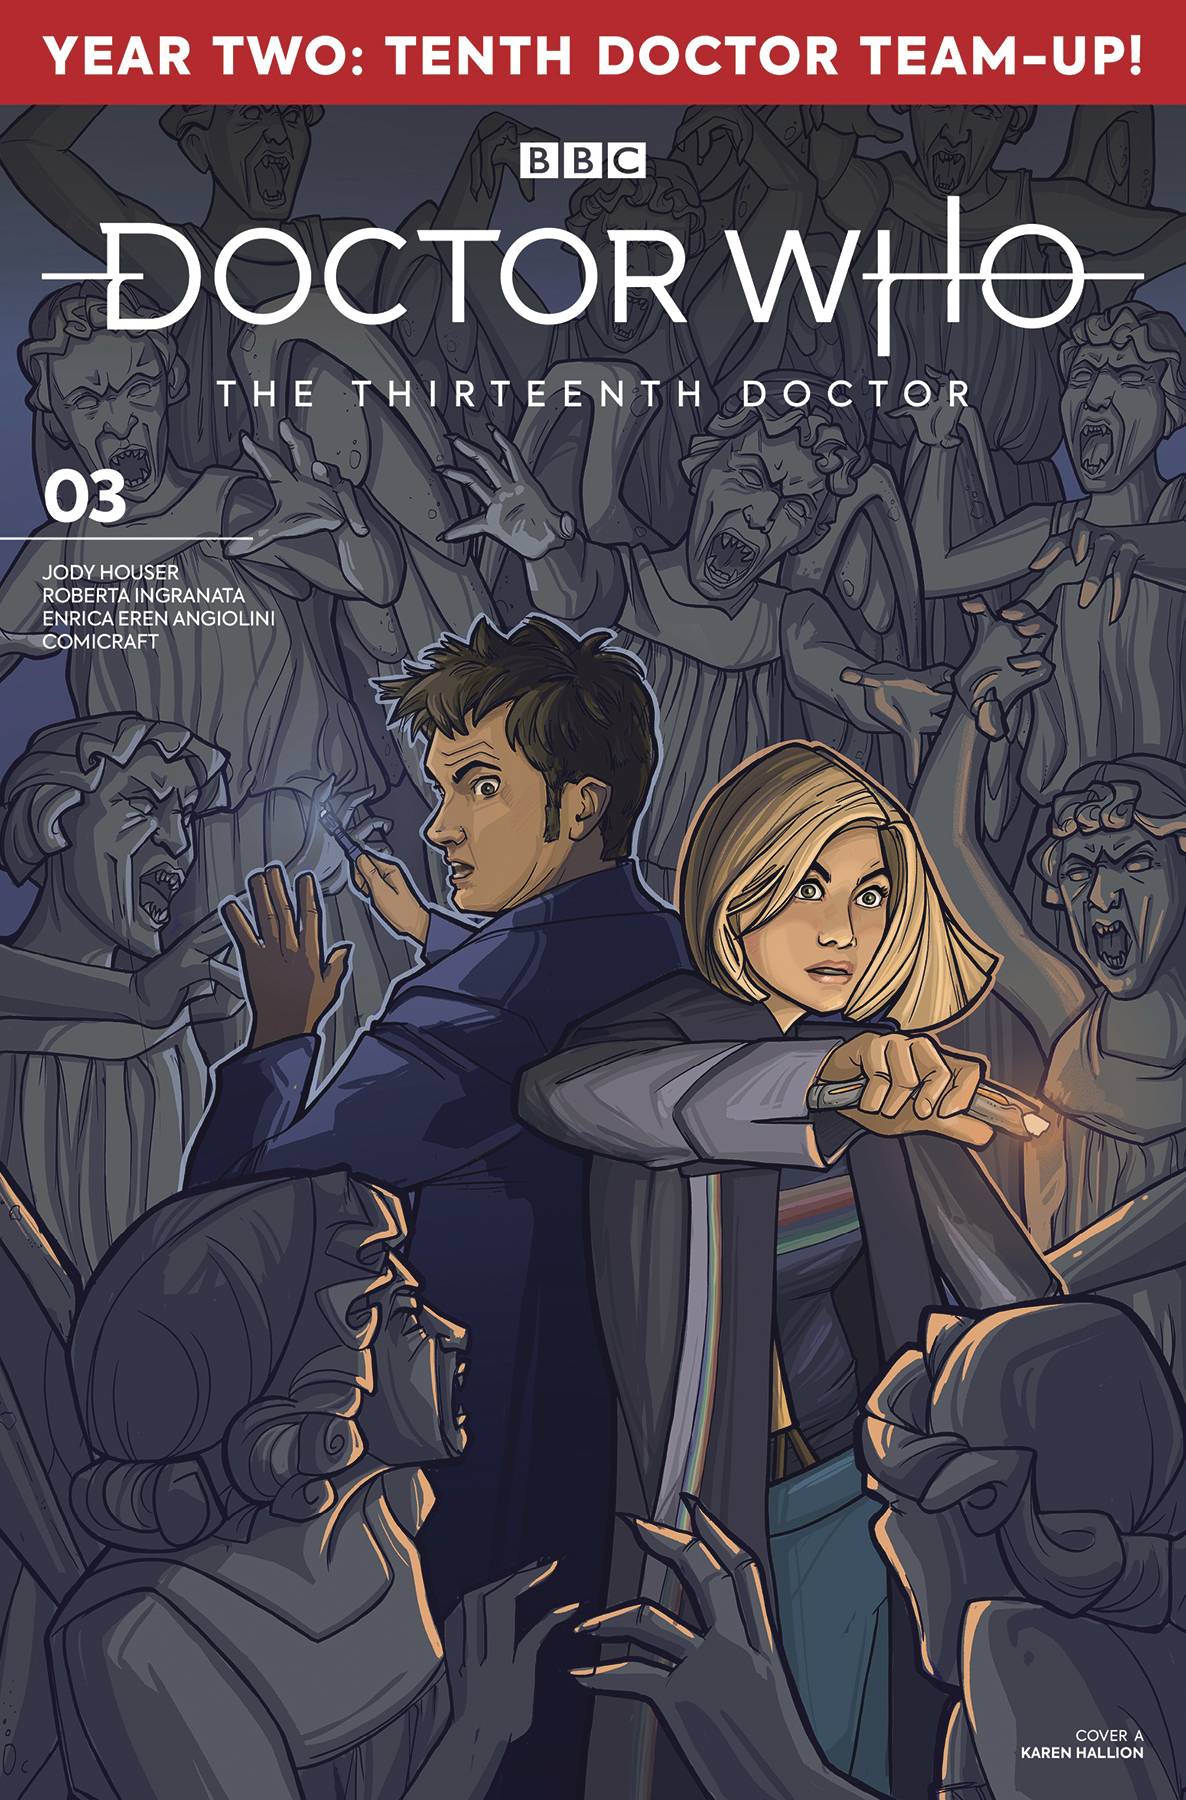 Doctor Who 13th Season Two #3 Cover A Hallion